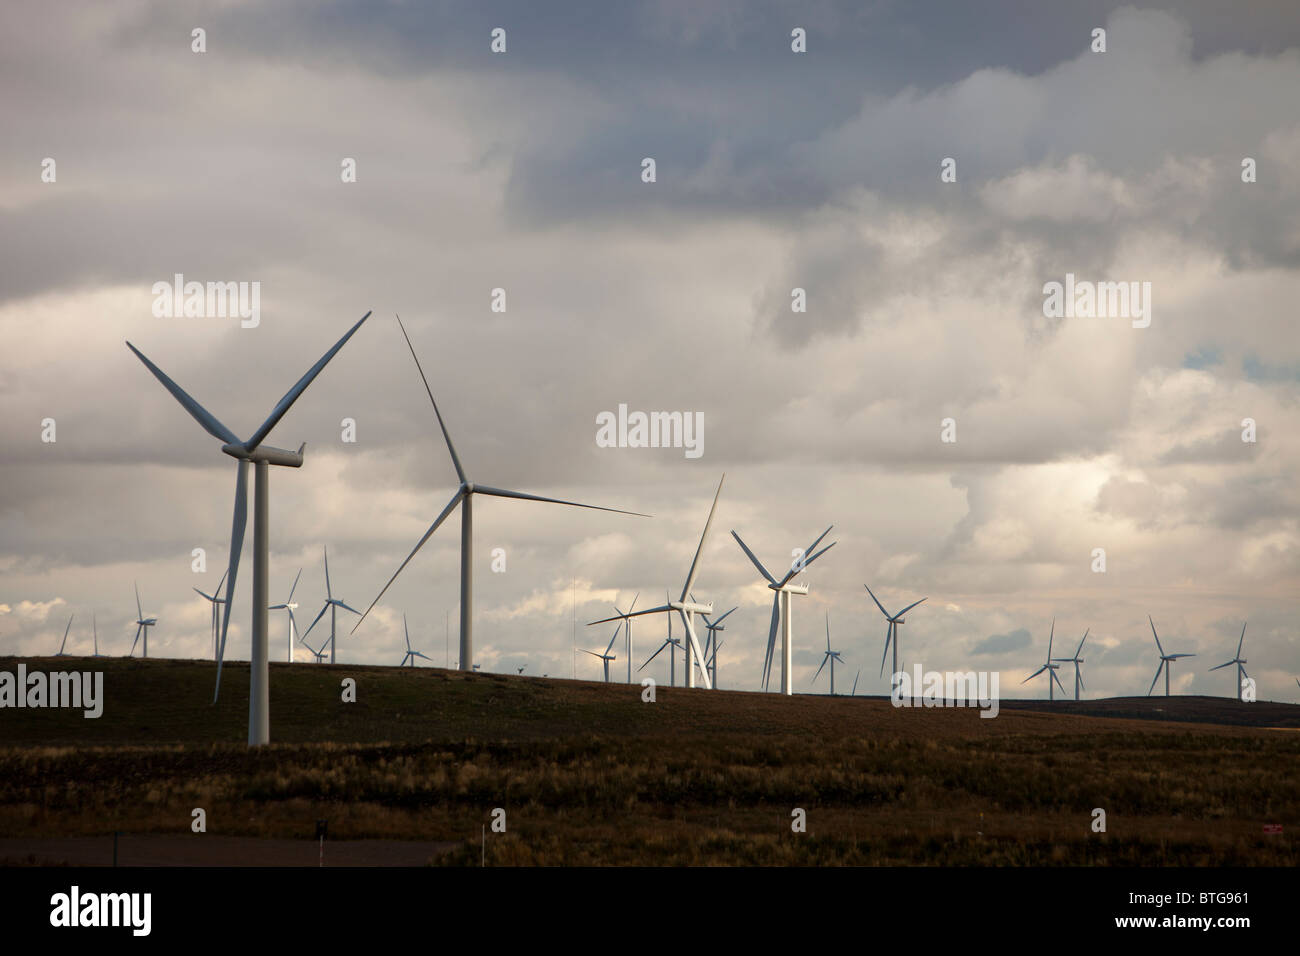 Whitlee wind farm south of Glasgow, Scotland, UK, is Europes largest onshore wind farm with 140 turbines. Stock Photo